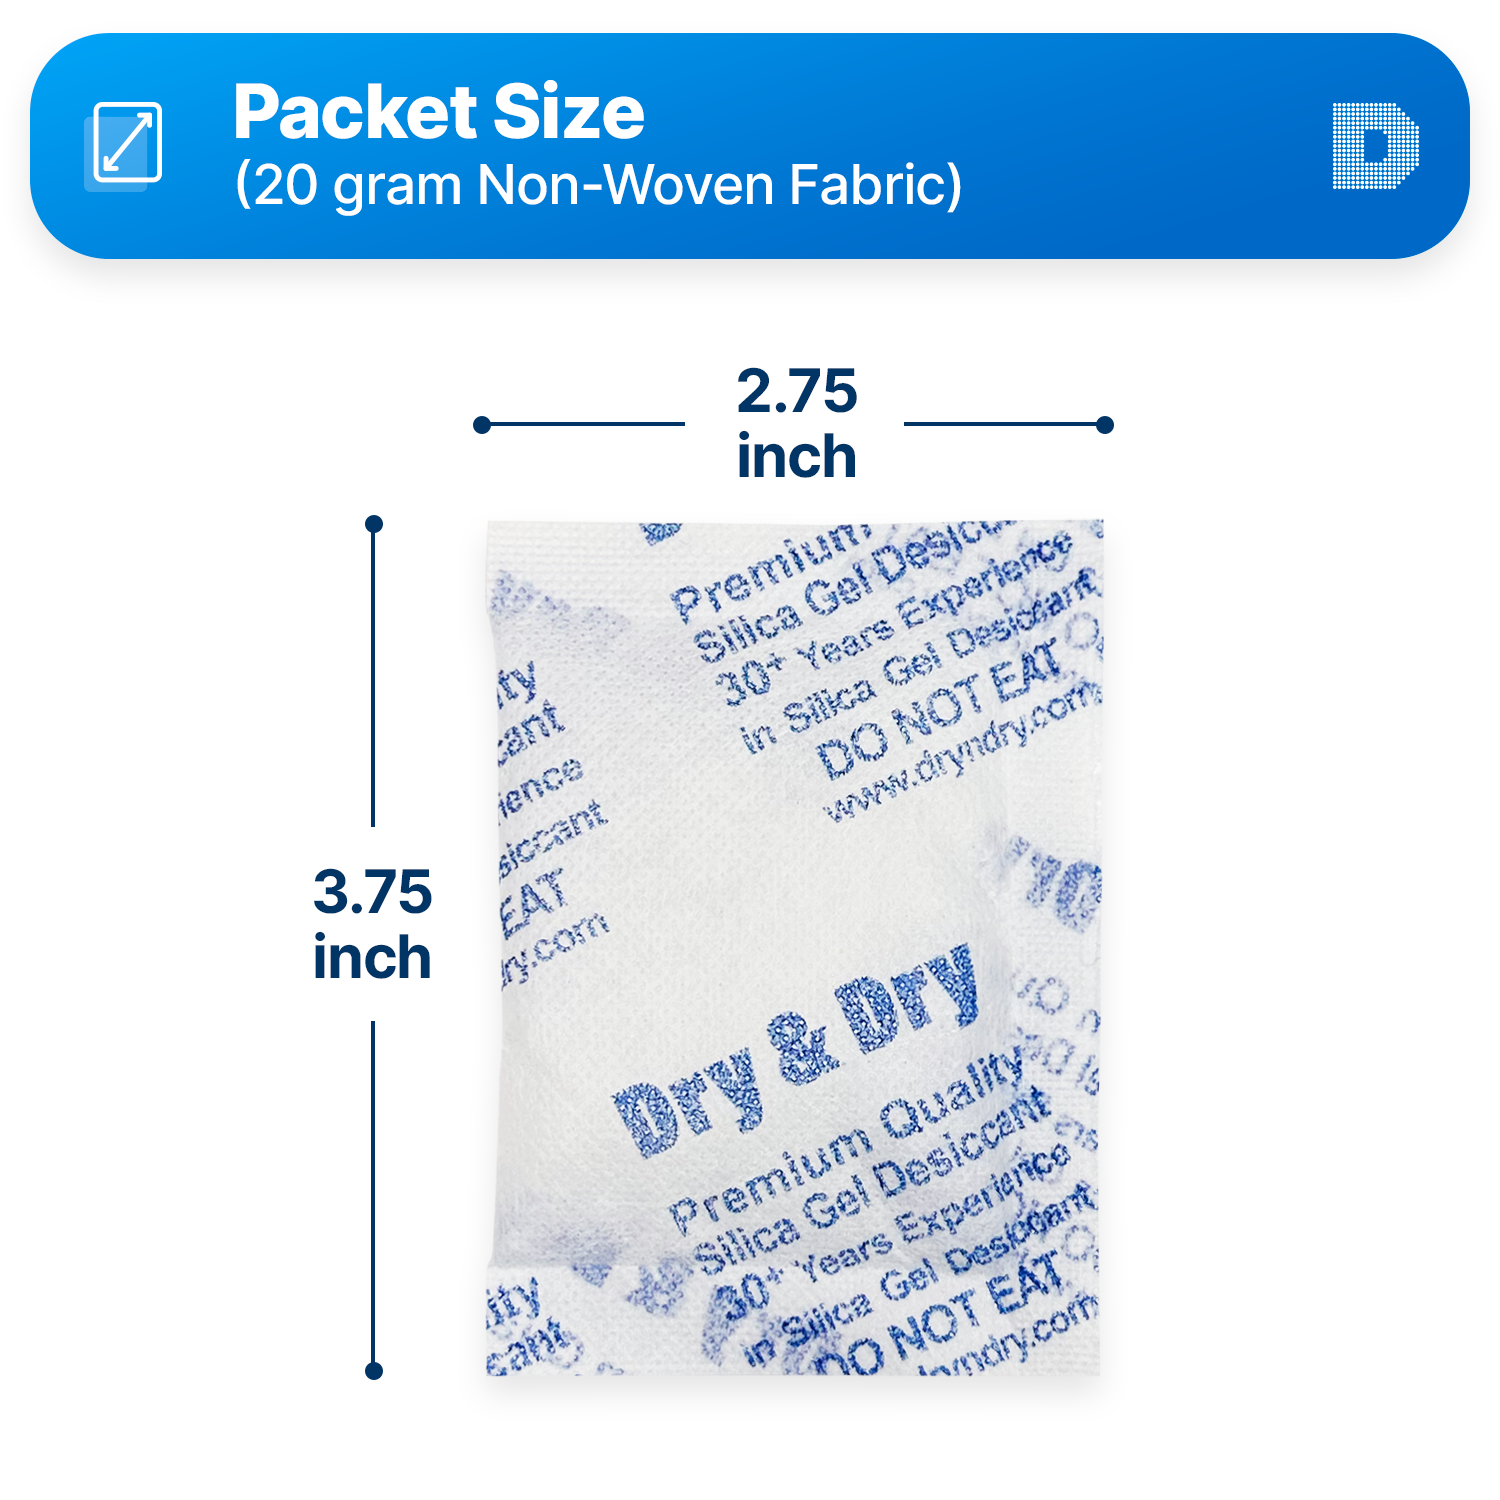 20 gram [800 Packets] "Dry & Dry" Premium Silica Gel Desiccant Packets - Rechargeable Non-Woven Fabric (Cloth)